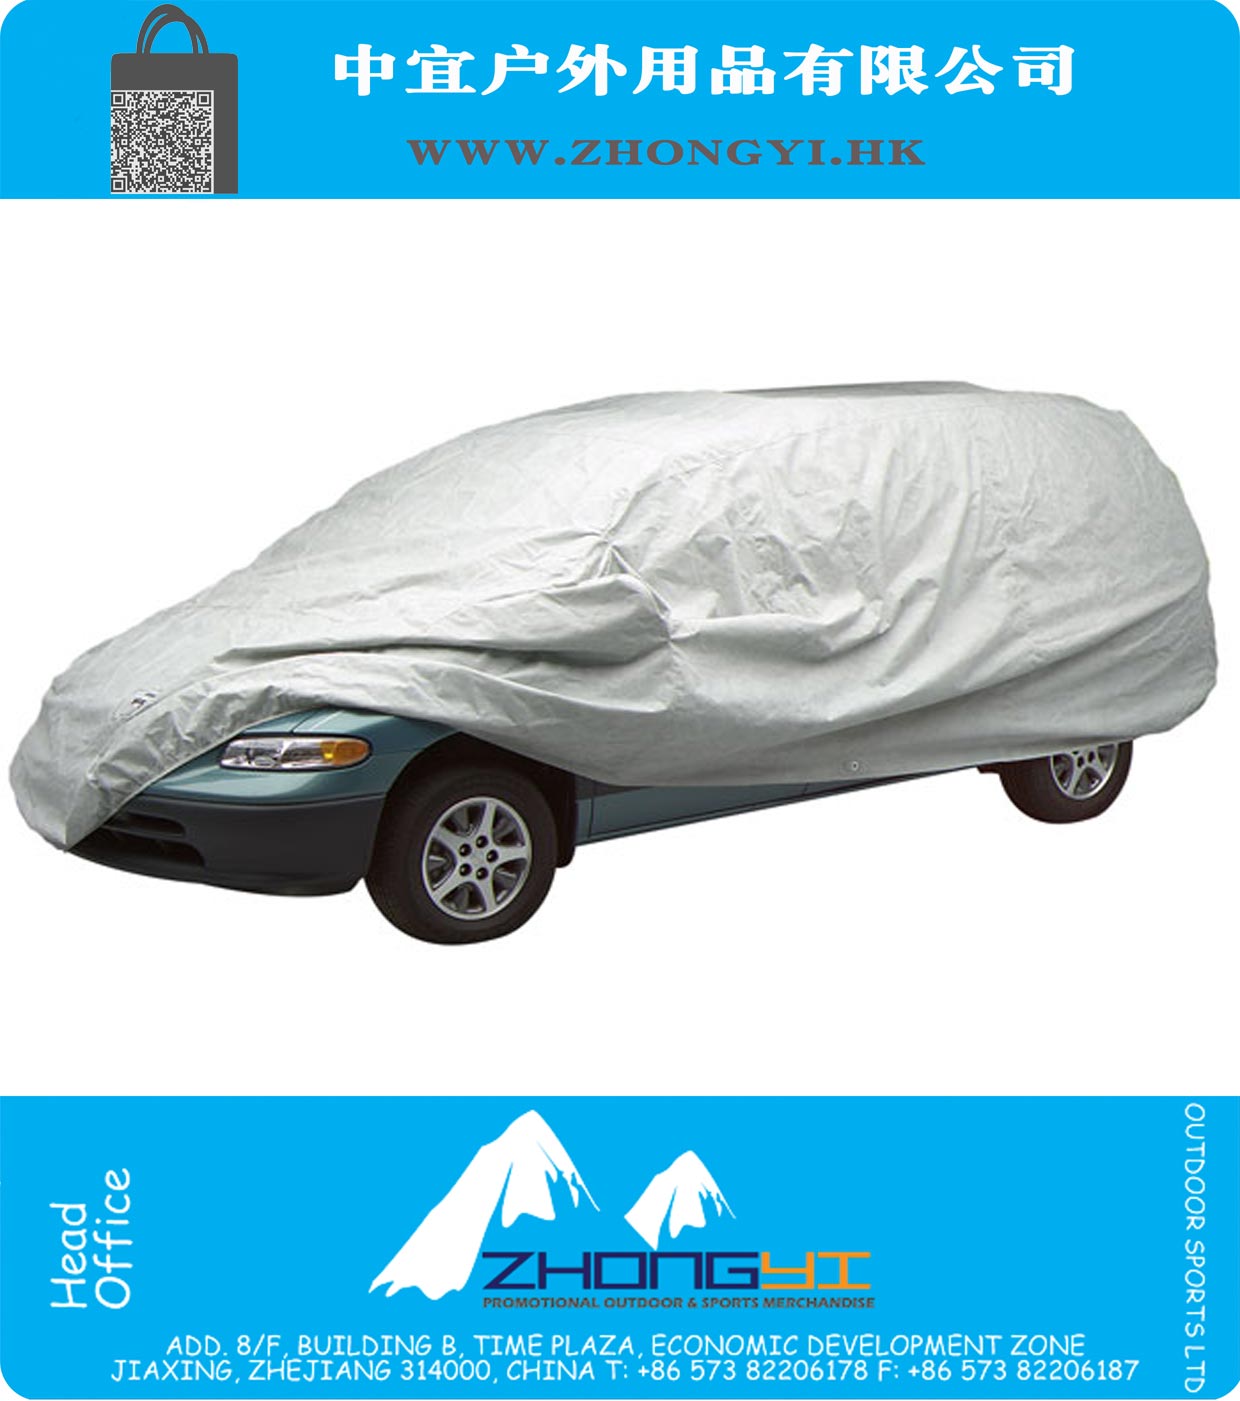 Ready-Fit Block-It 200 Car Covers